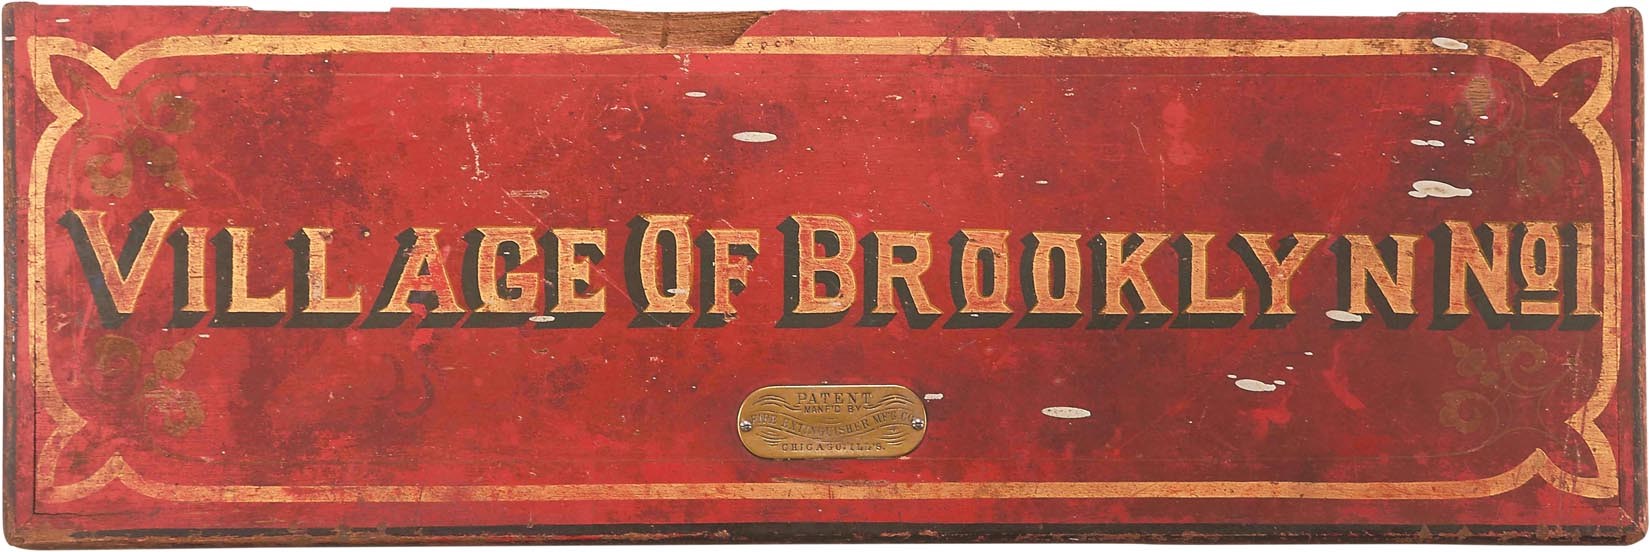 Rock And Pop Culture - 1880s "Village of Brooklyn" Handpainted Fire Truck Gate